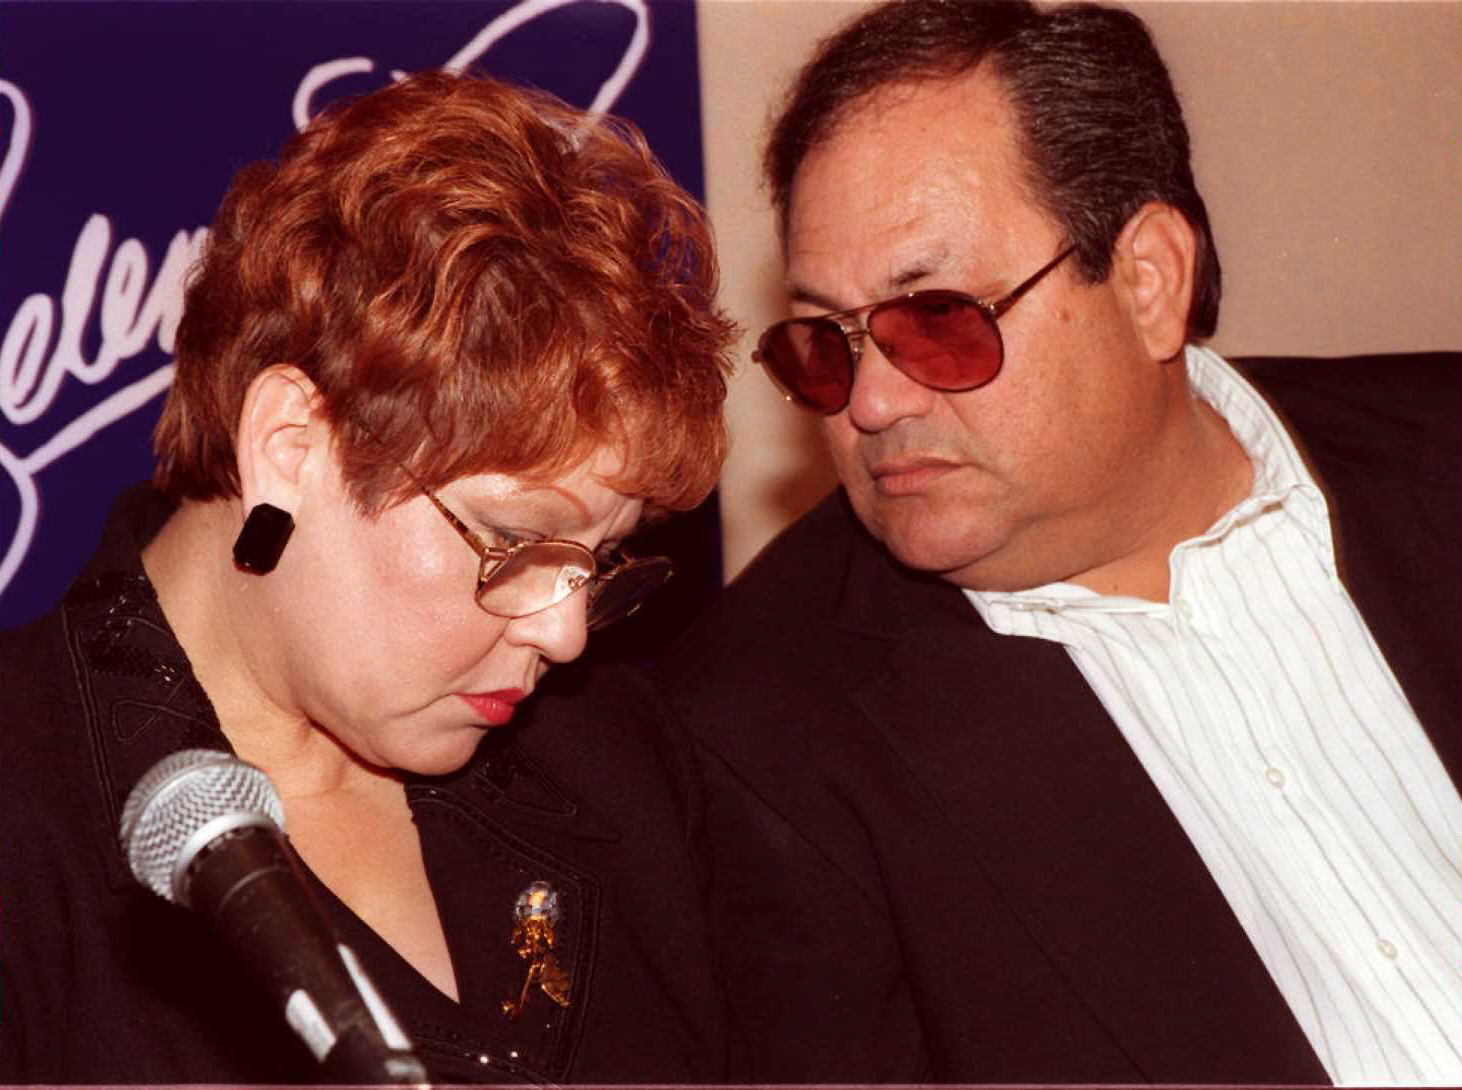 Marcella Samora and Abraham Quintanilla Jr. at a press conference for a Warner Brothers Studio movie about Selena on June 18, 1996, in Beverly Hills, California. | Source: Getty Images